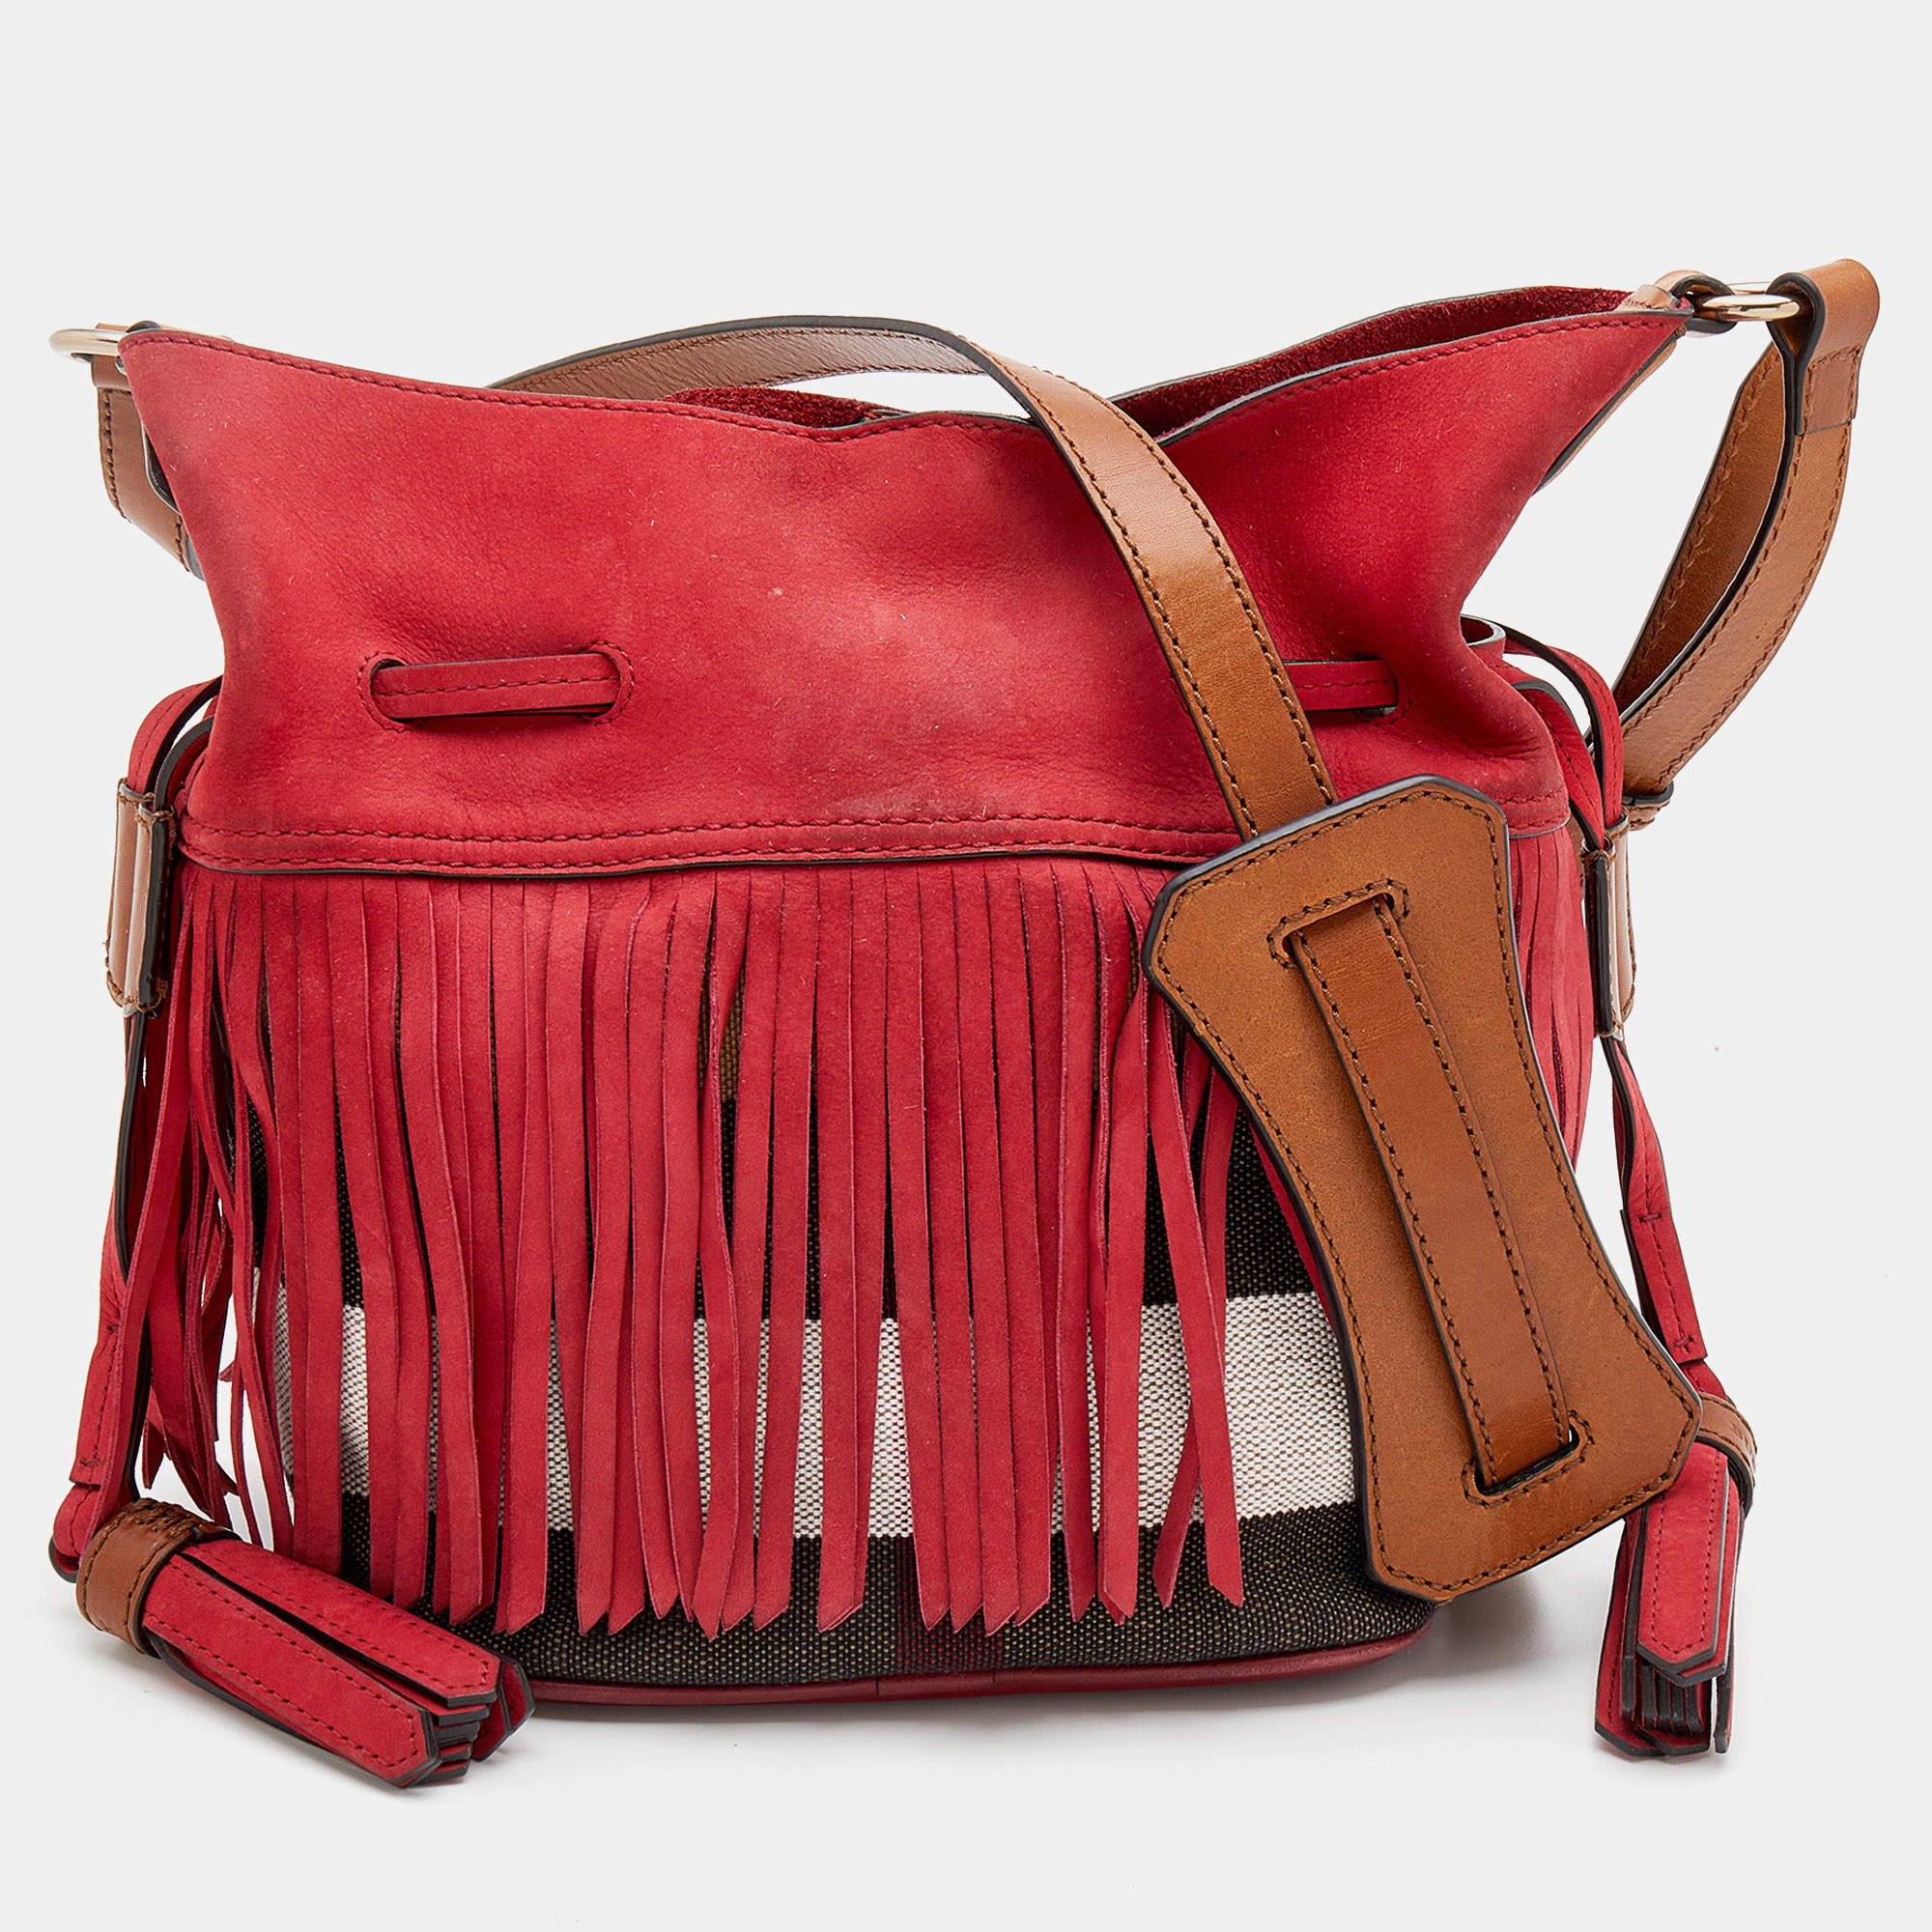 Burberry Multicolor Leather And Canvas Fringe Bucket Bag Burberry | TLC